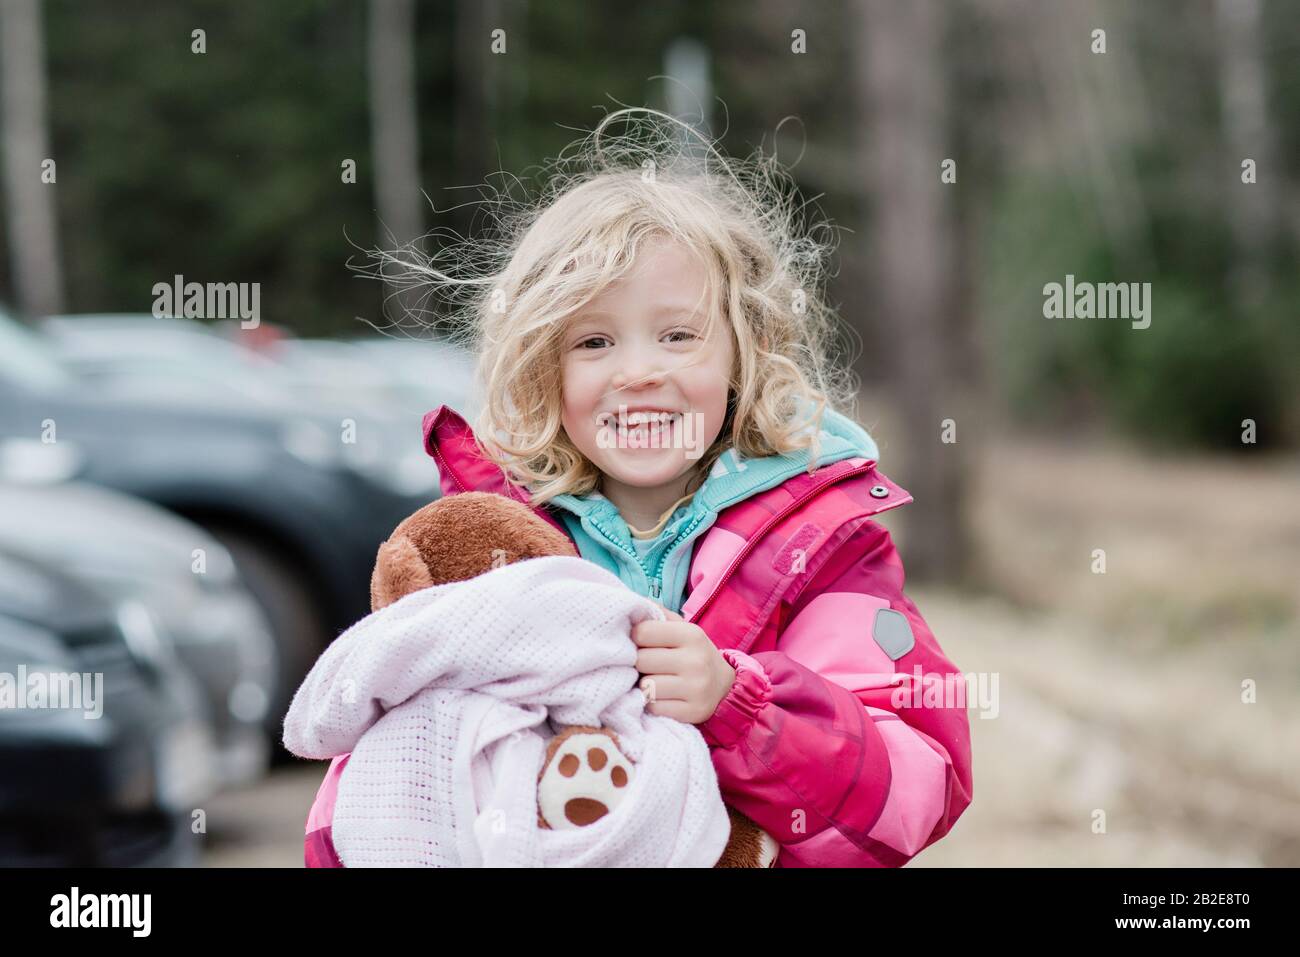 candid portrait of a young girl smiling  with messy hair and comforter Stock Photo